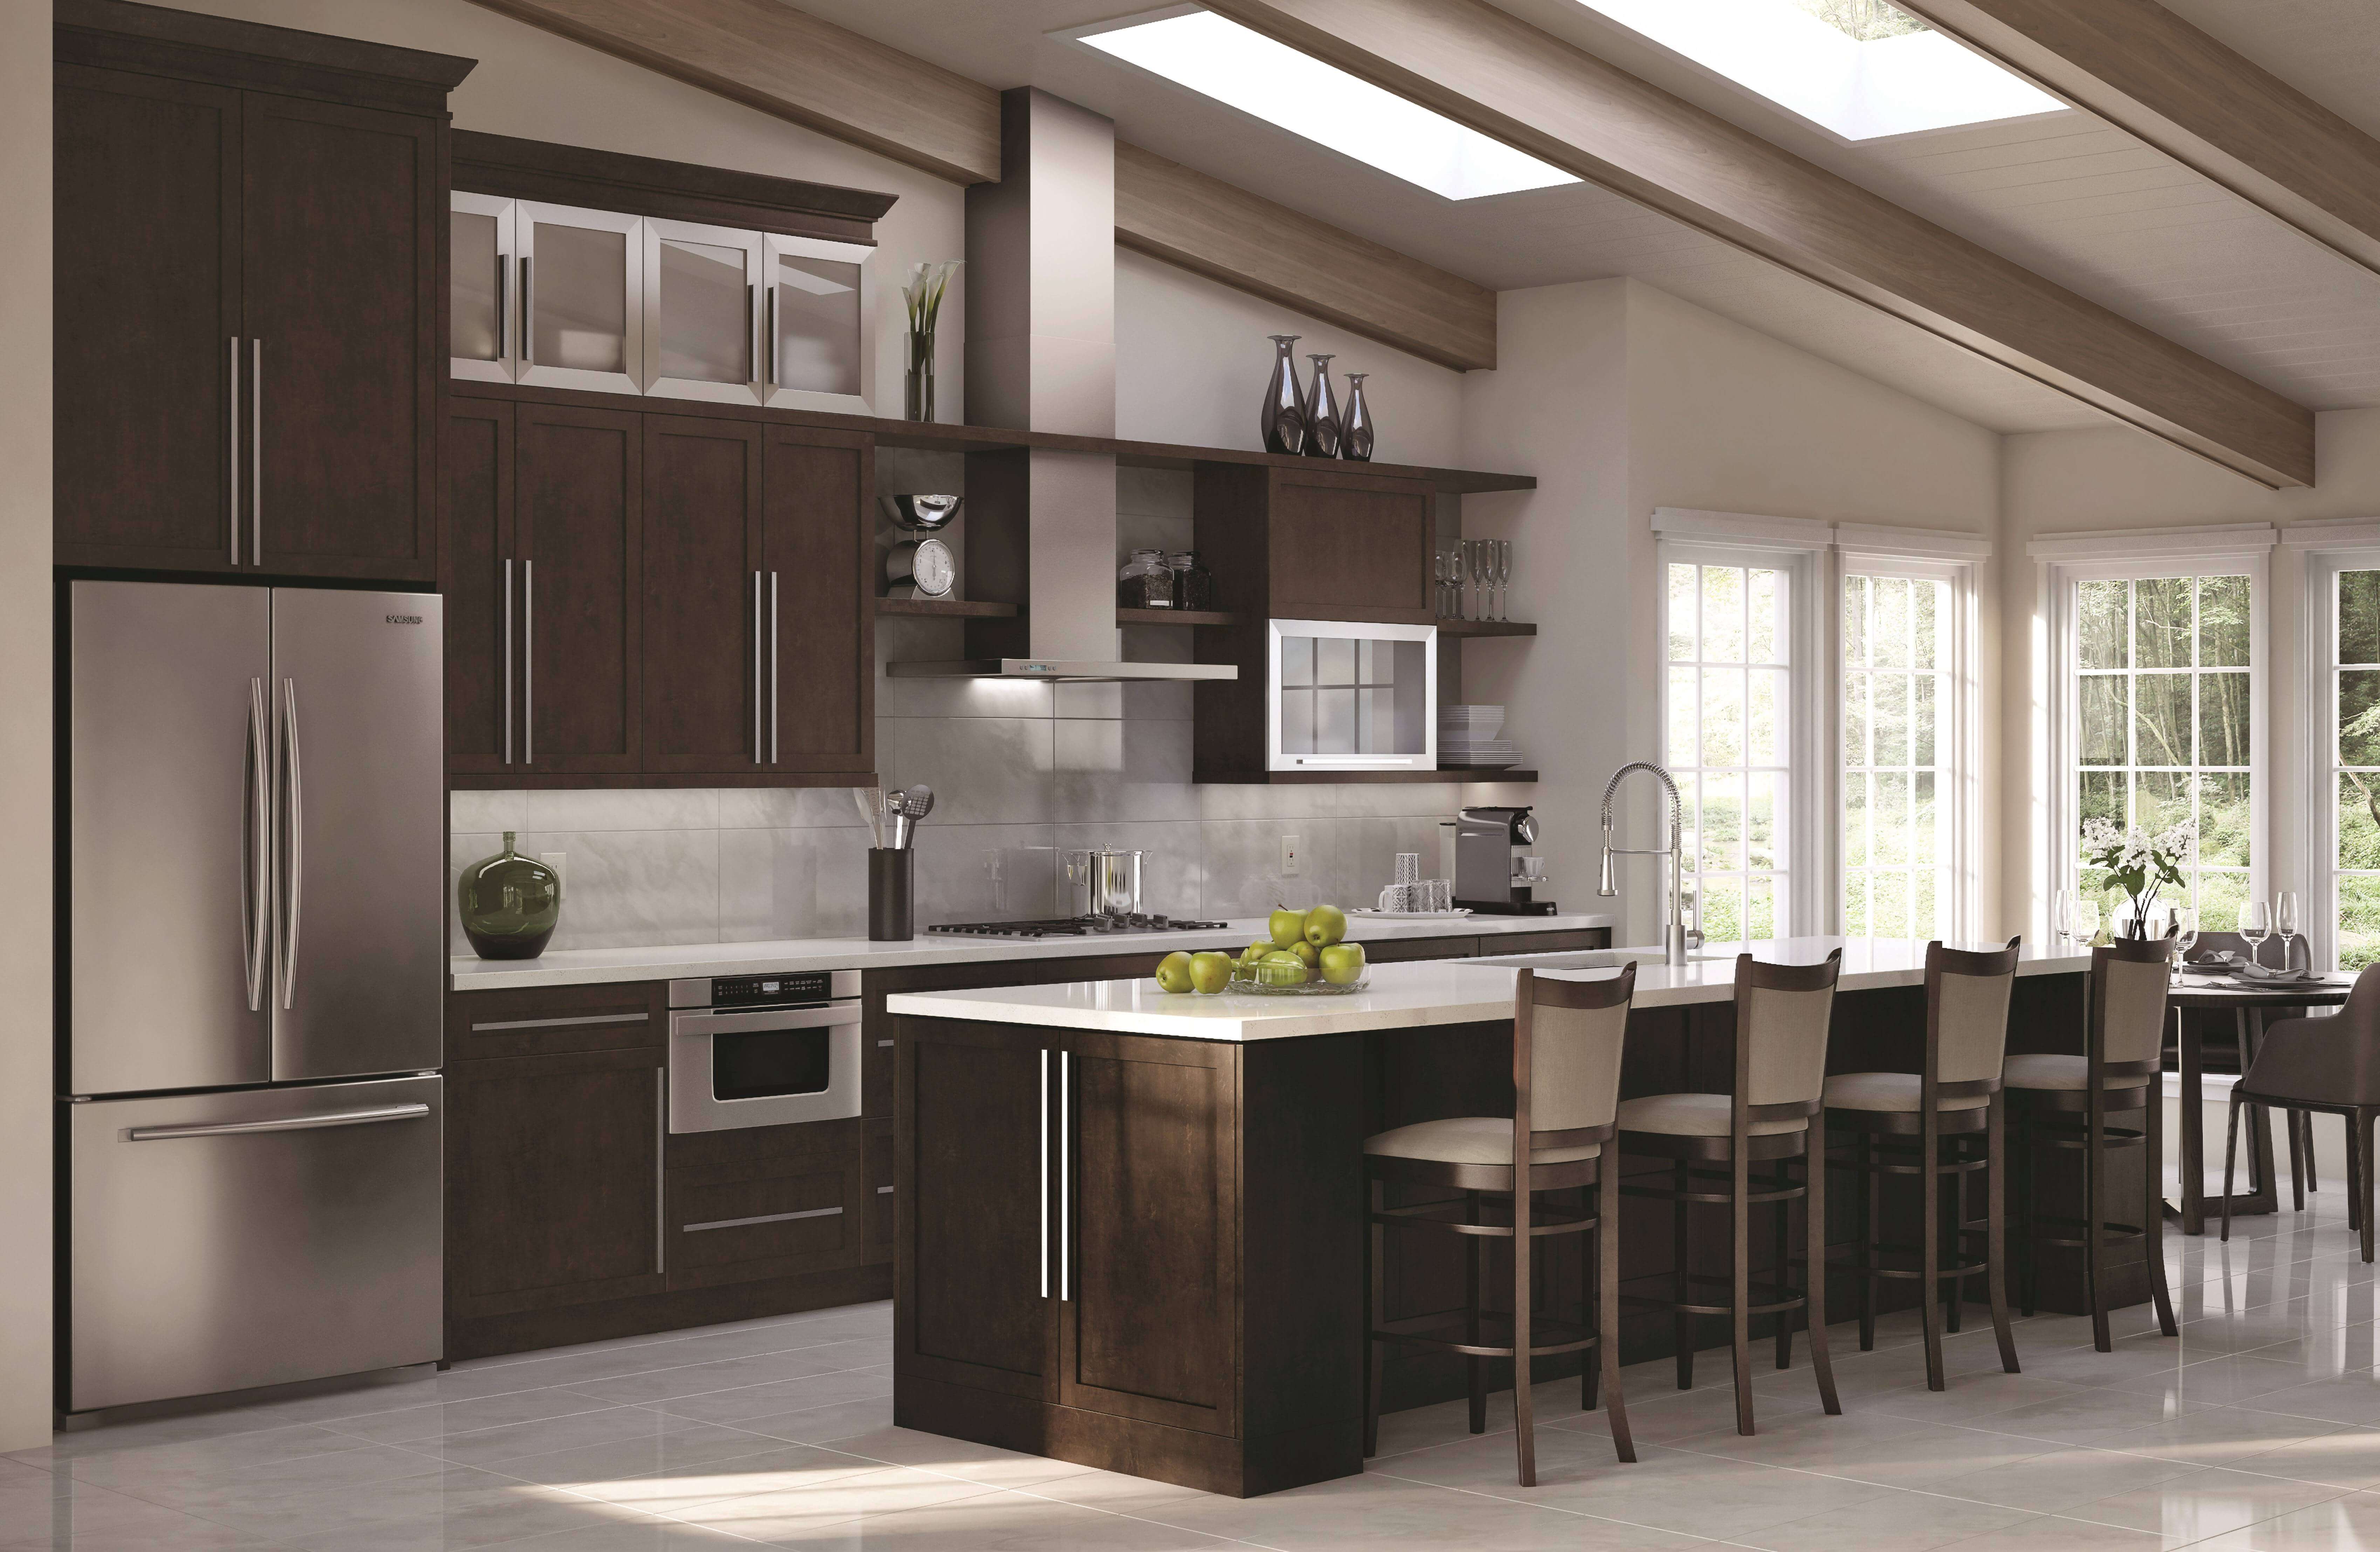 Start implementing your kitchen ideas with Quick Ship Kitchens